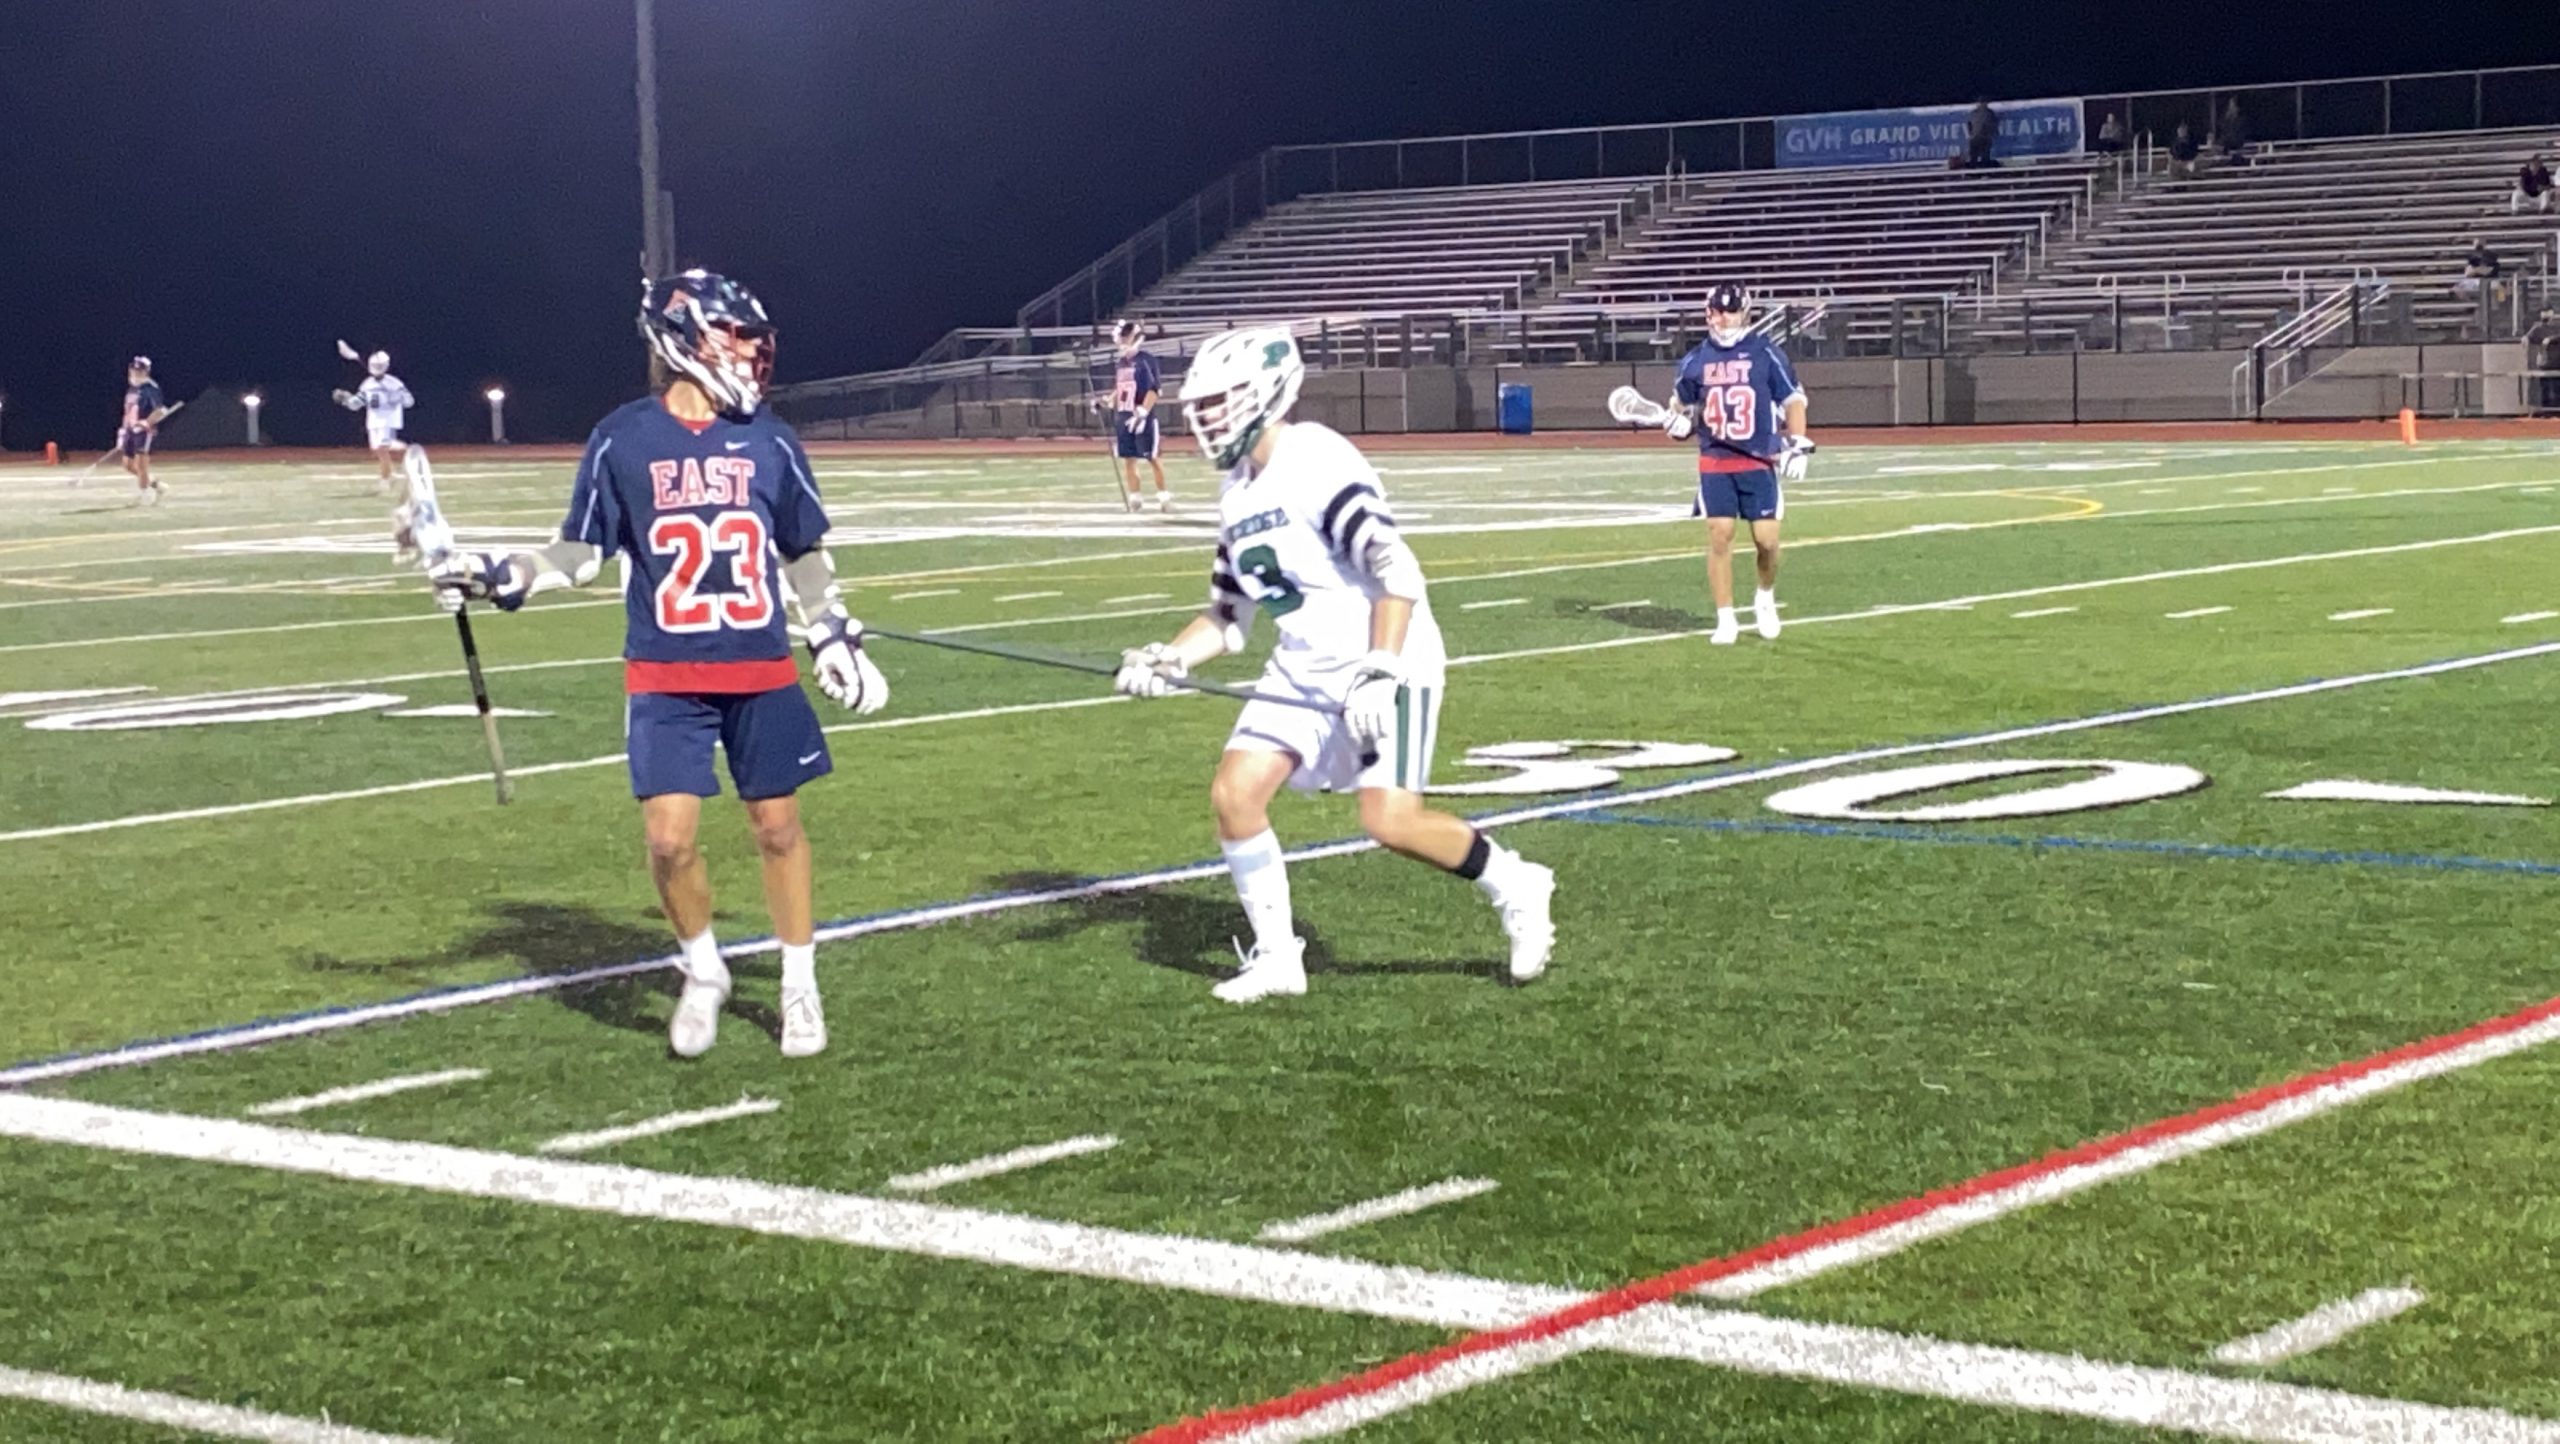 CB East rallies past Pennridge to stay undefeated in SOL National – PA